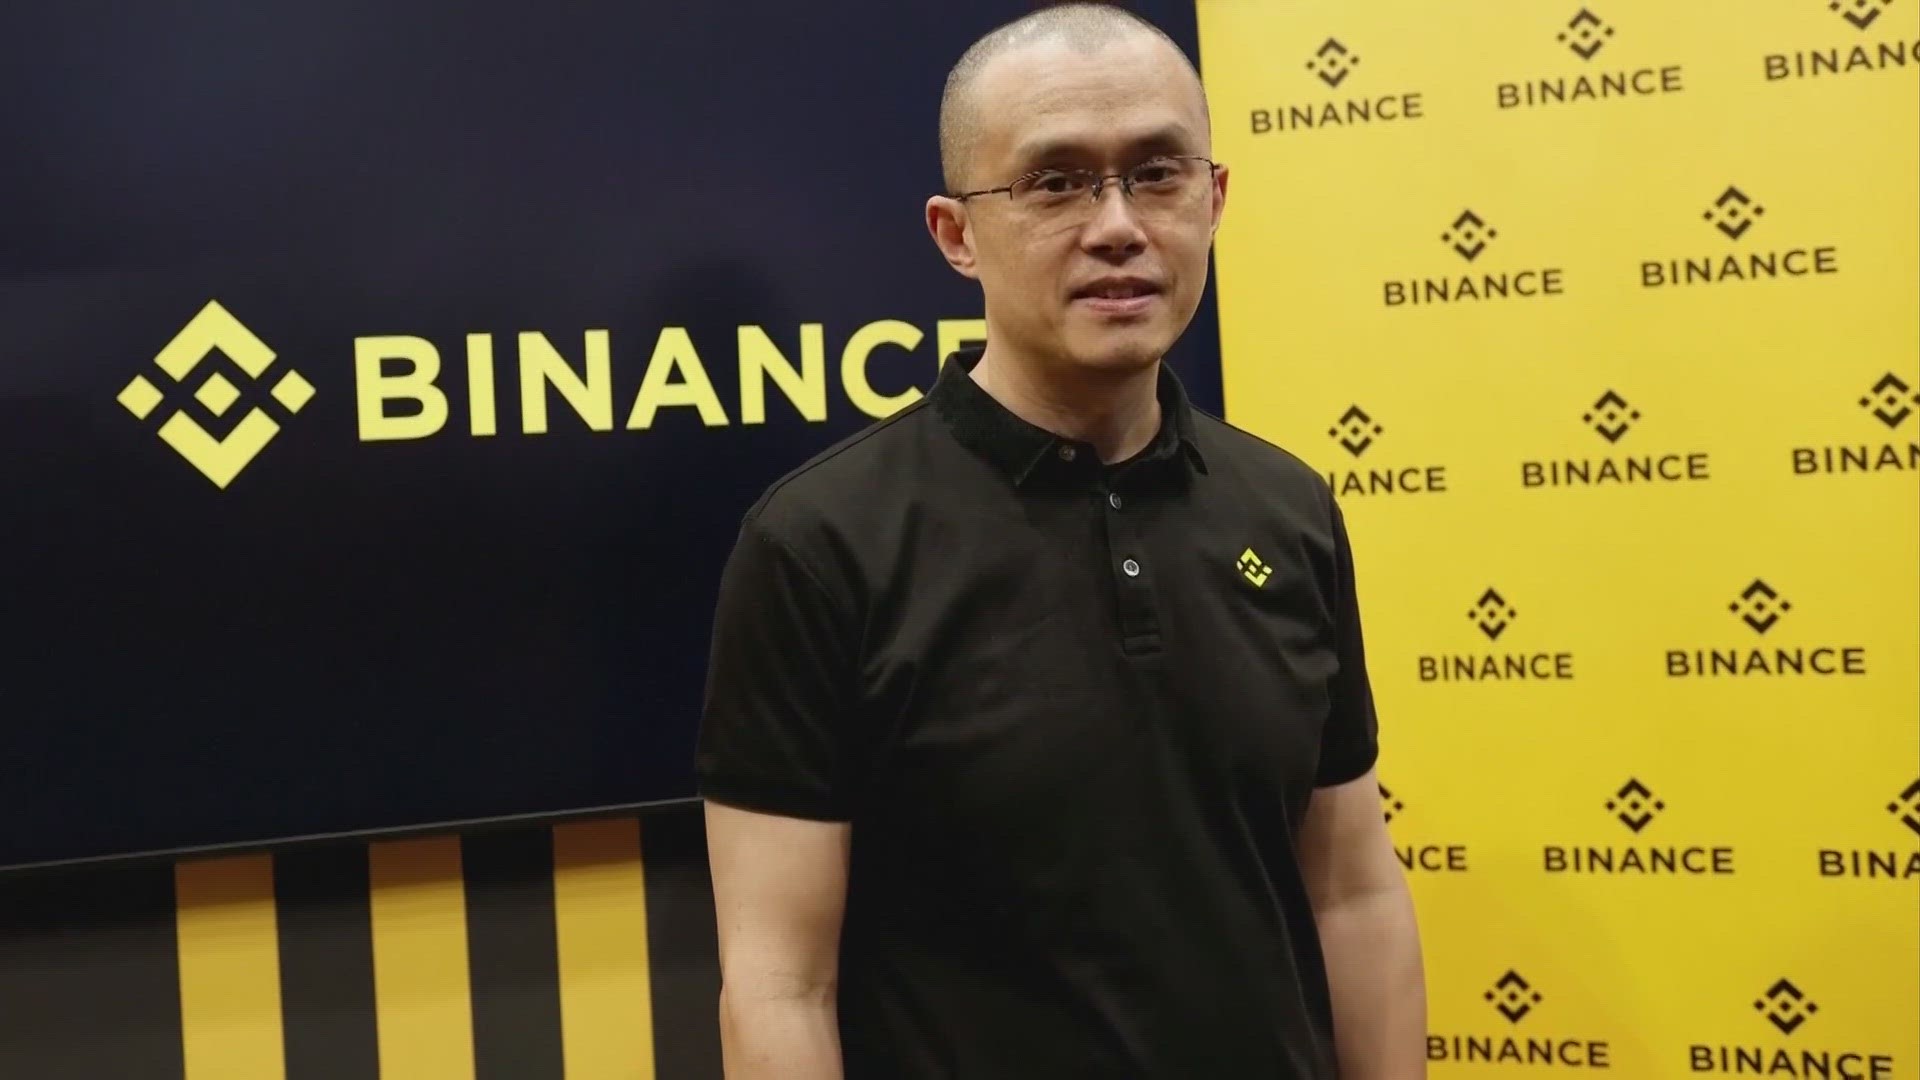 The founder of Binance pleaded guilty to a felony charge that he failed to take steps to prevent money laundering.